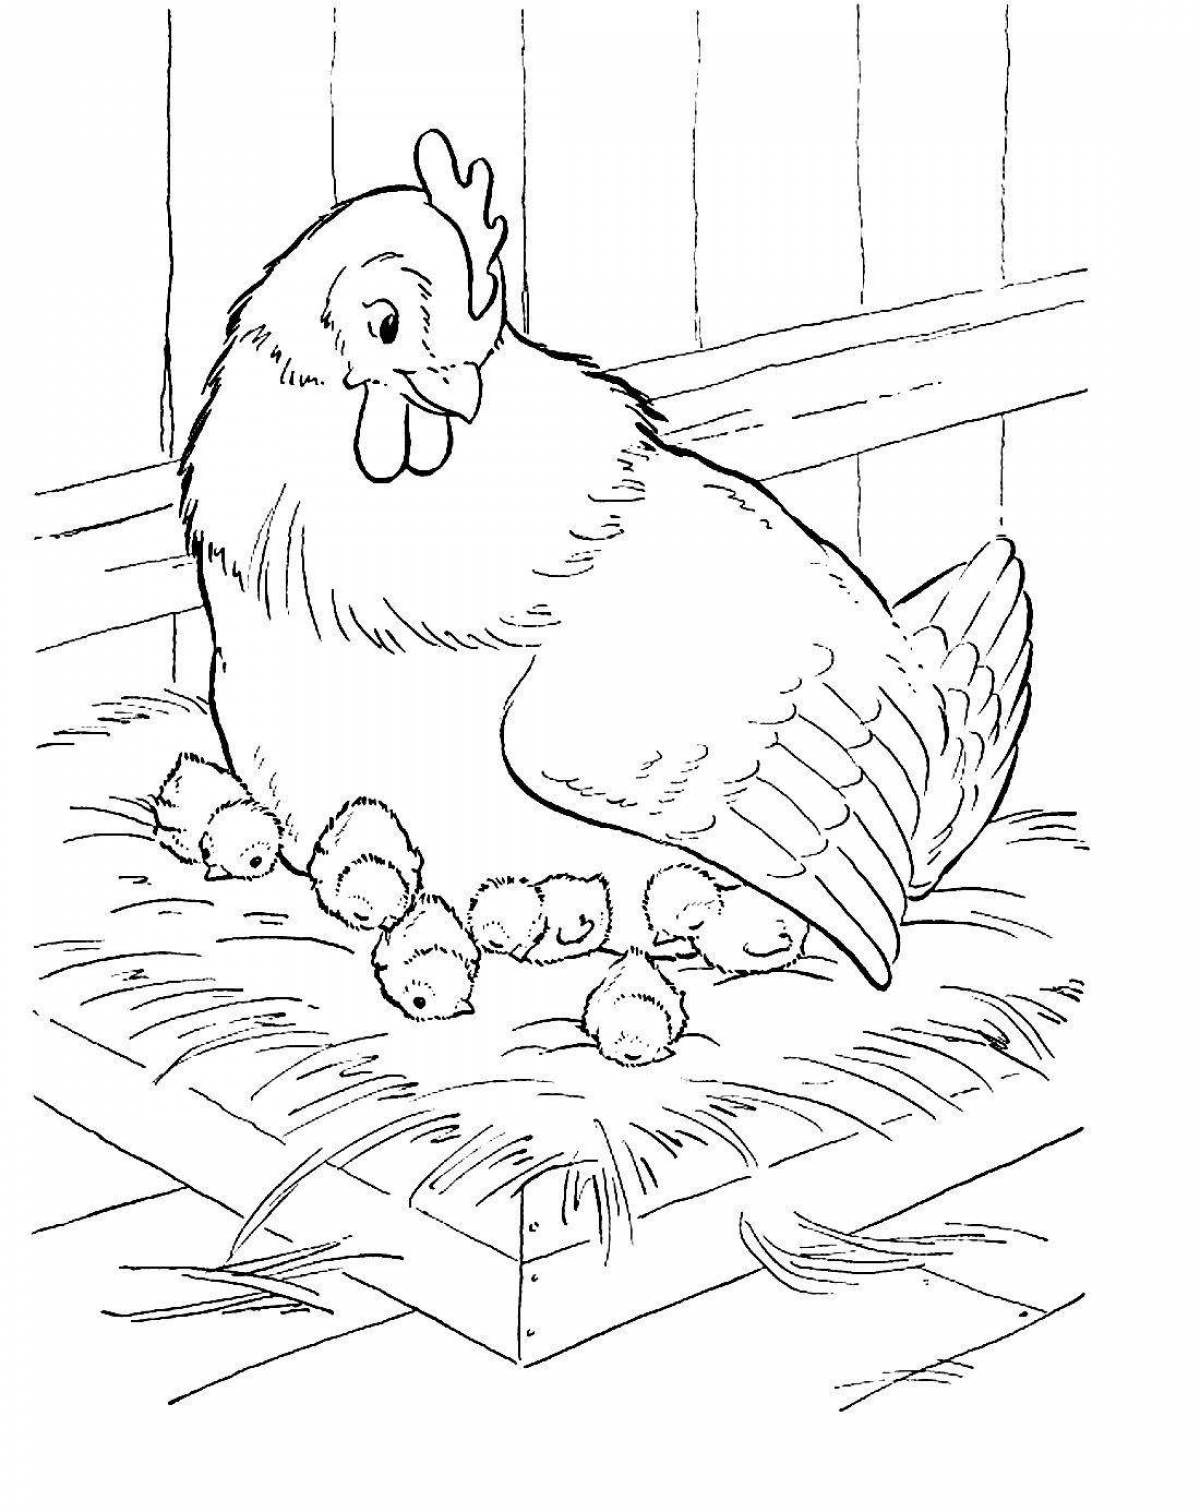 Delightful chick pockmarked coloring book for children 2-3 years old